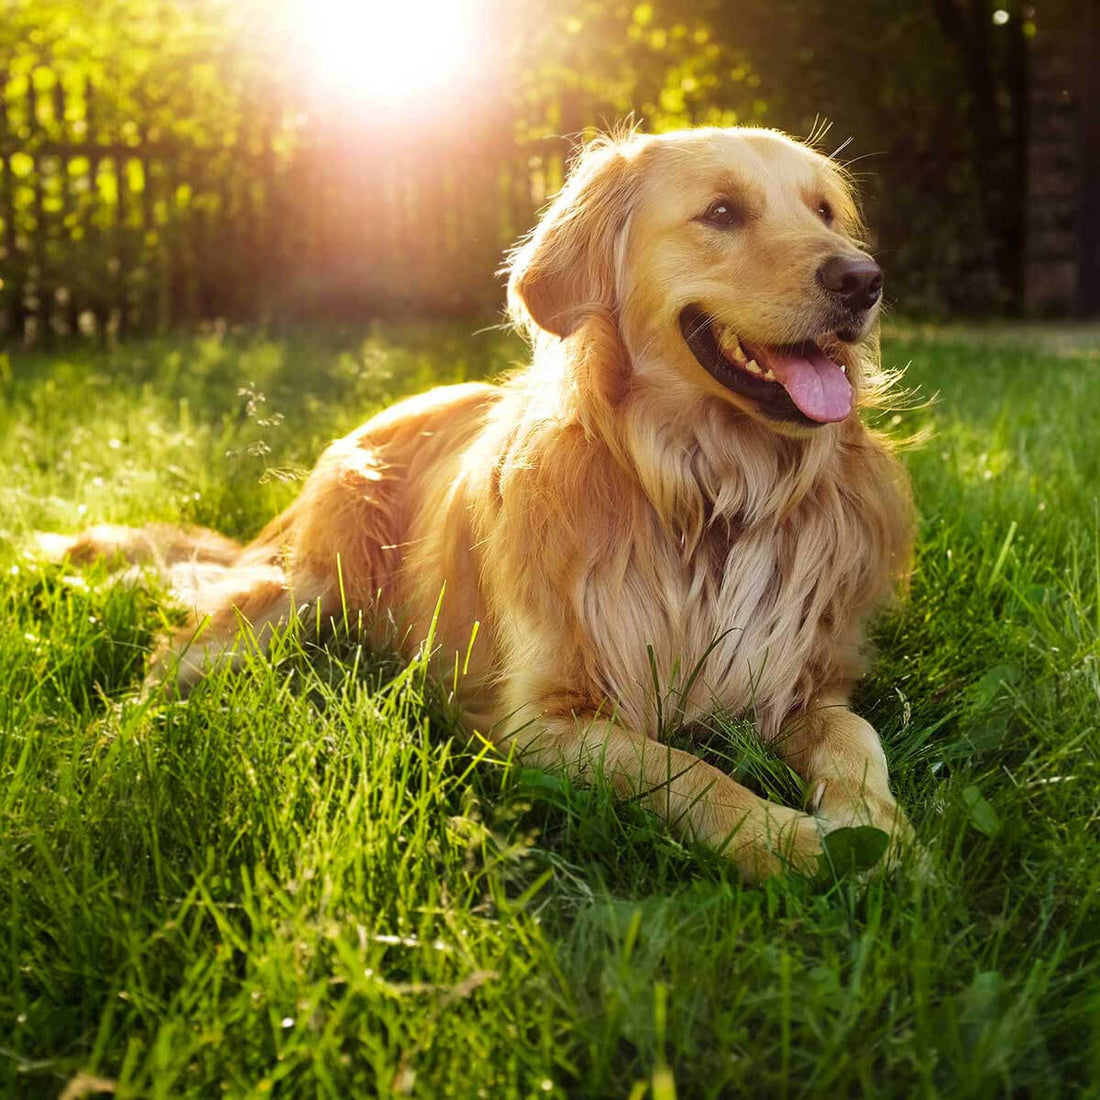 Dog Breed Series: All About your Golden Retriever Part 3